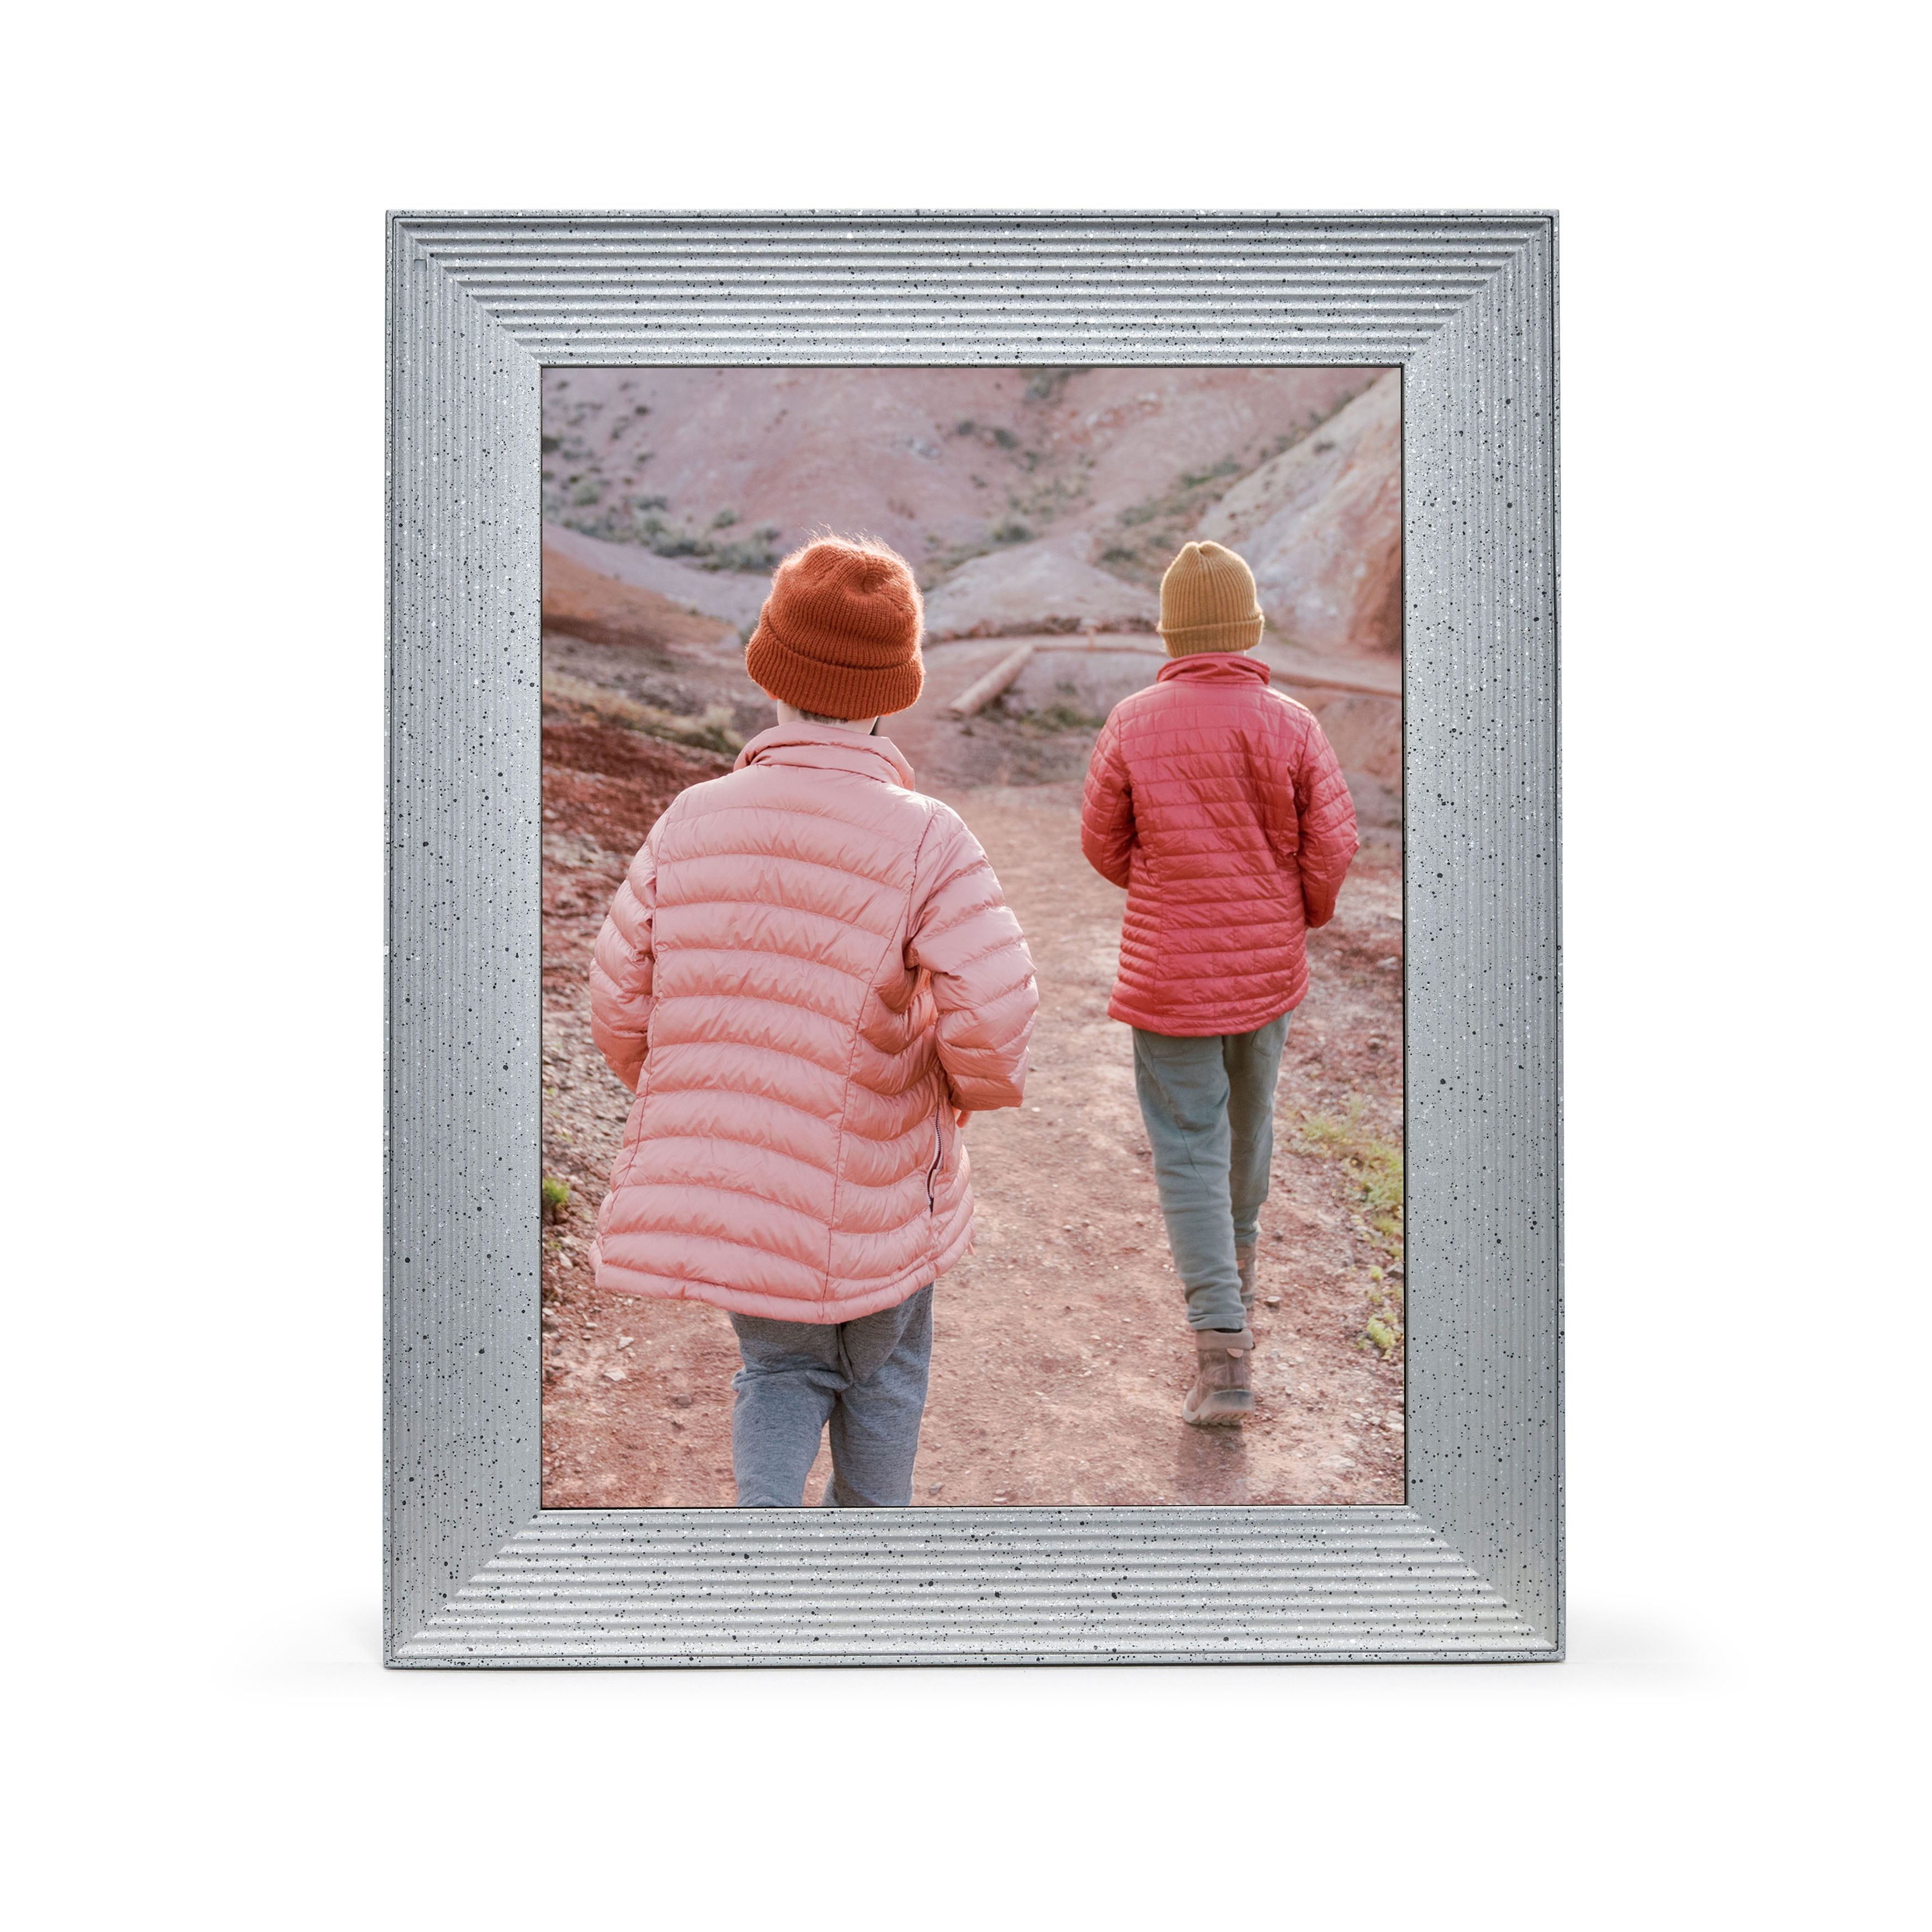 Free inch 9.7 Frames Luxe Unlimited Sandstone Frame by Aura with Picture Mason Wi-Fi Storage Digital – 2K